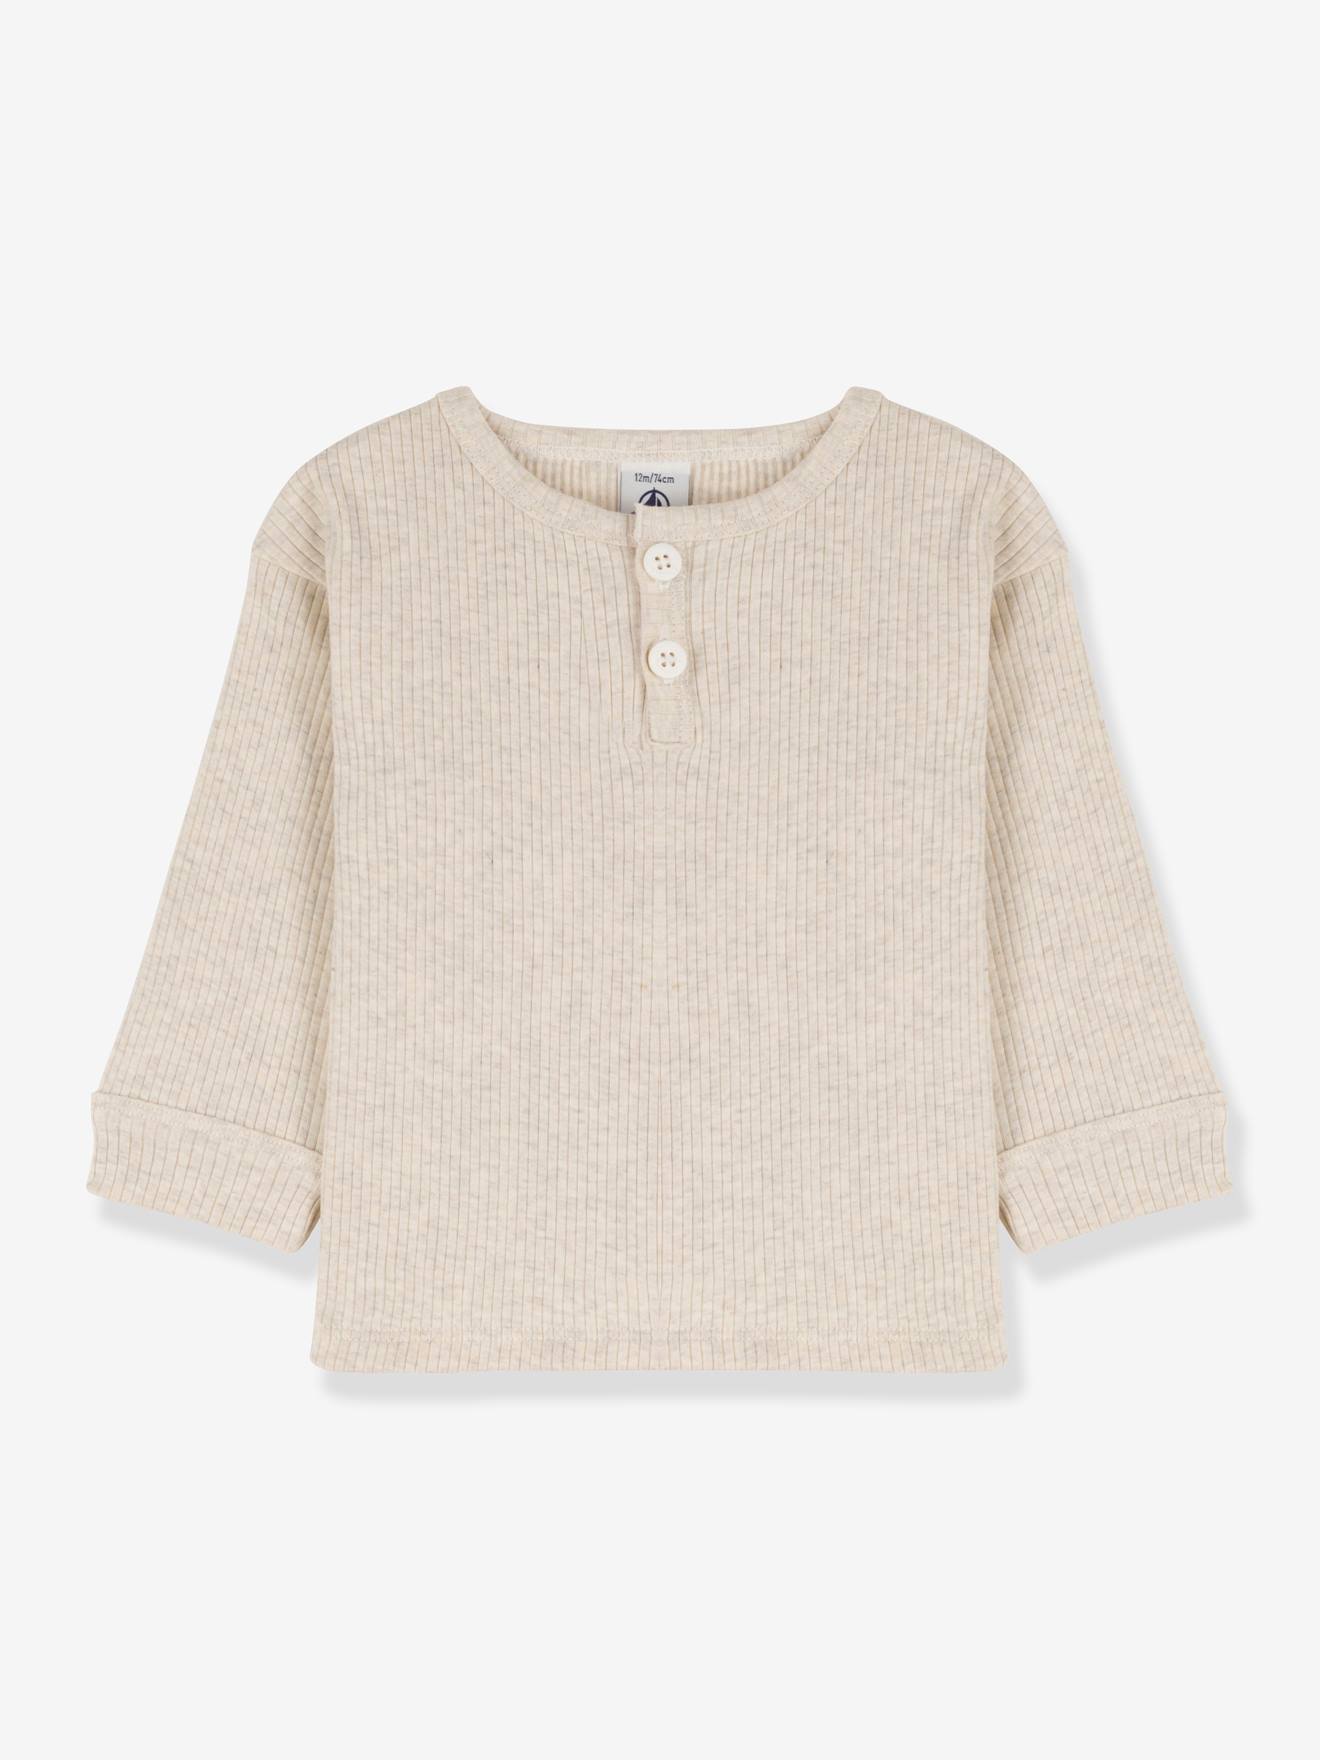 Long Sleeve Organic Cotton Top for Babies, by Petit Bateau marl beige